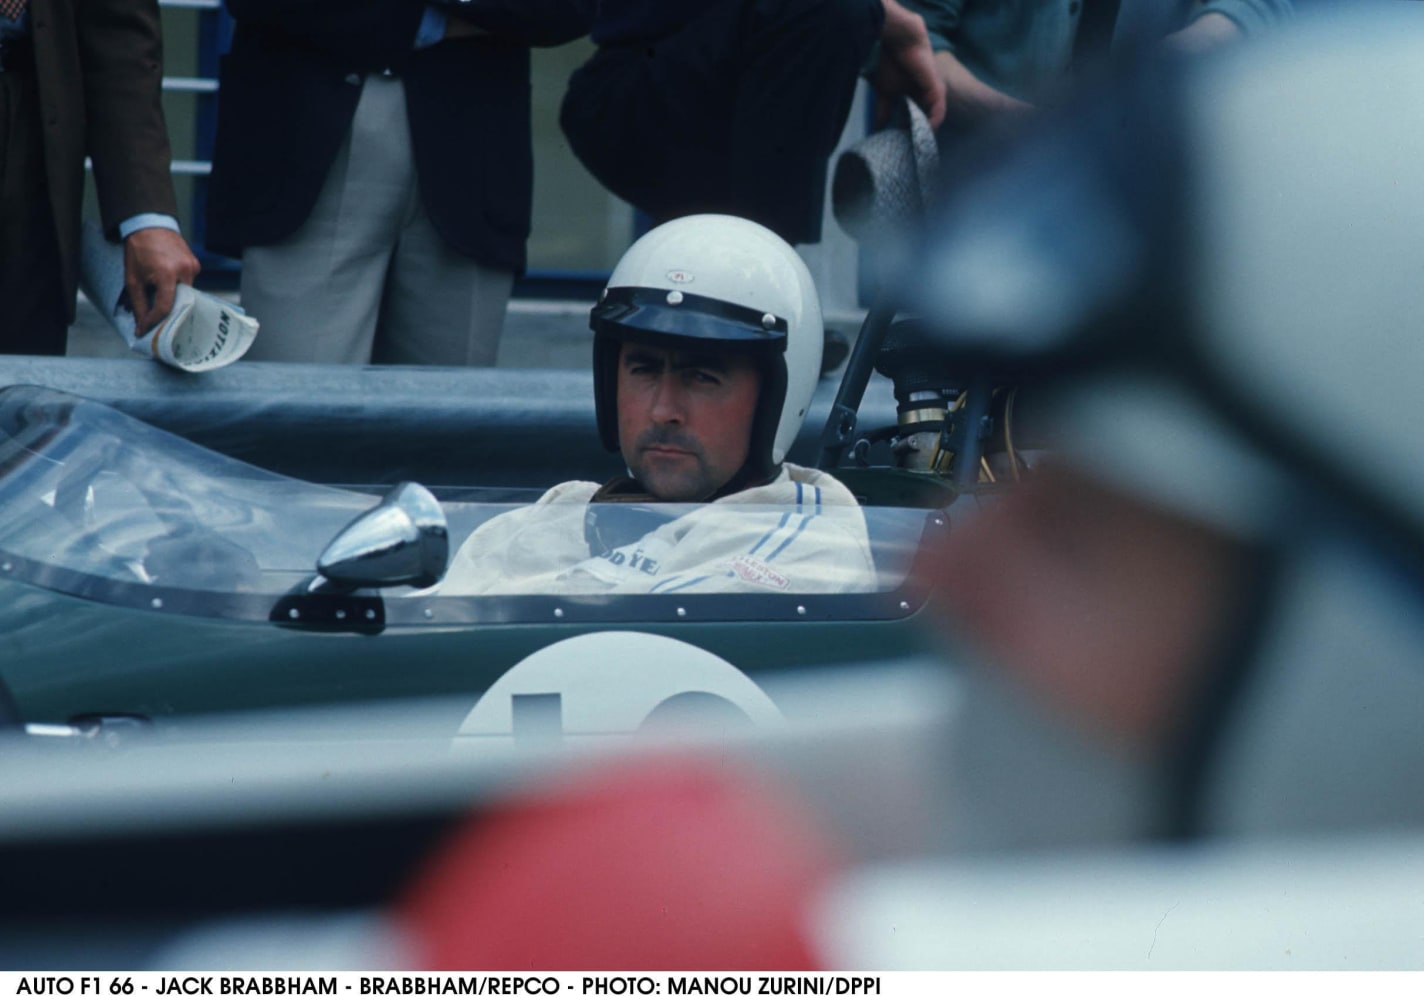 F1: Brabham name now fully protected, industry